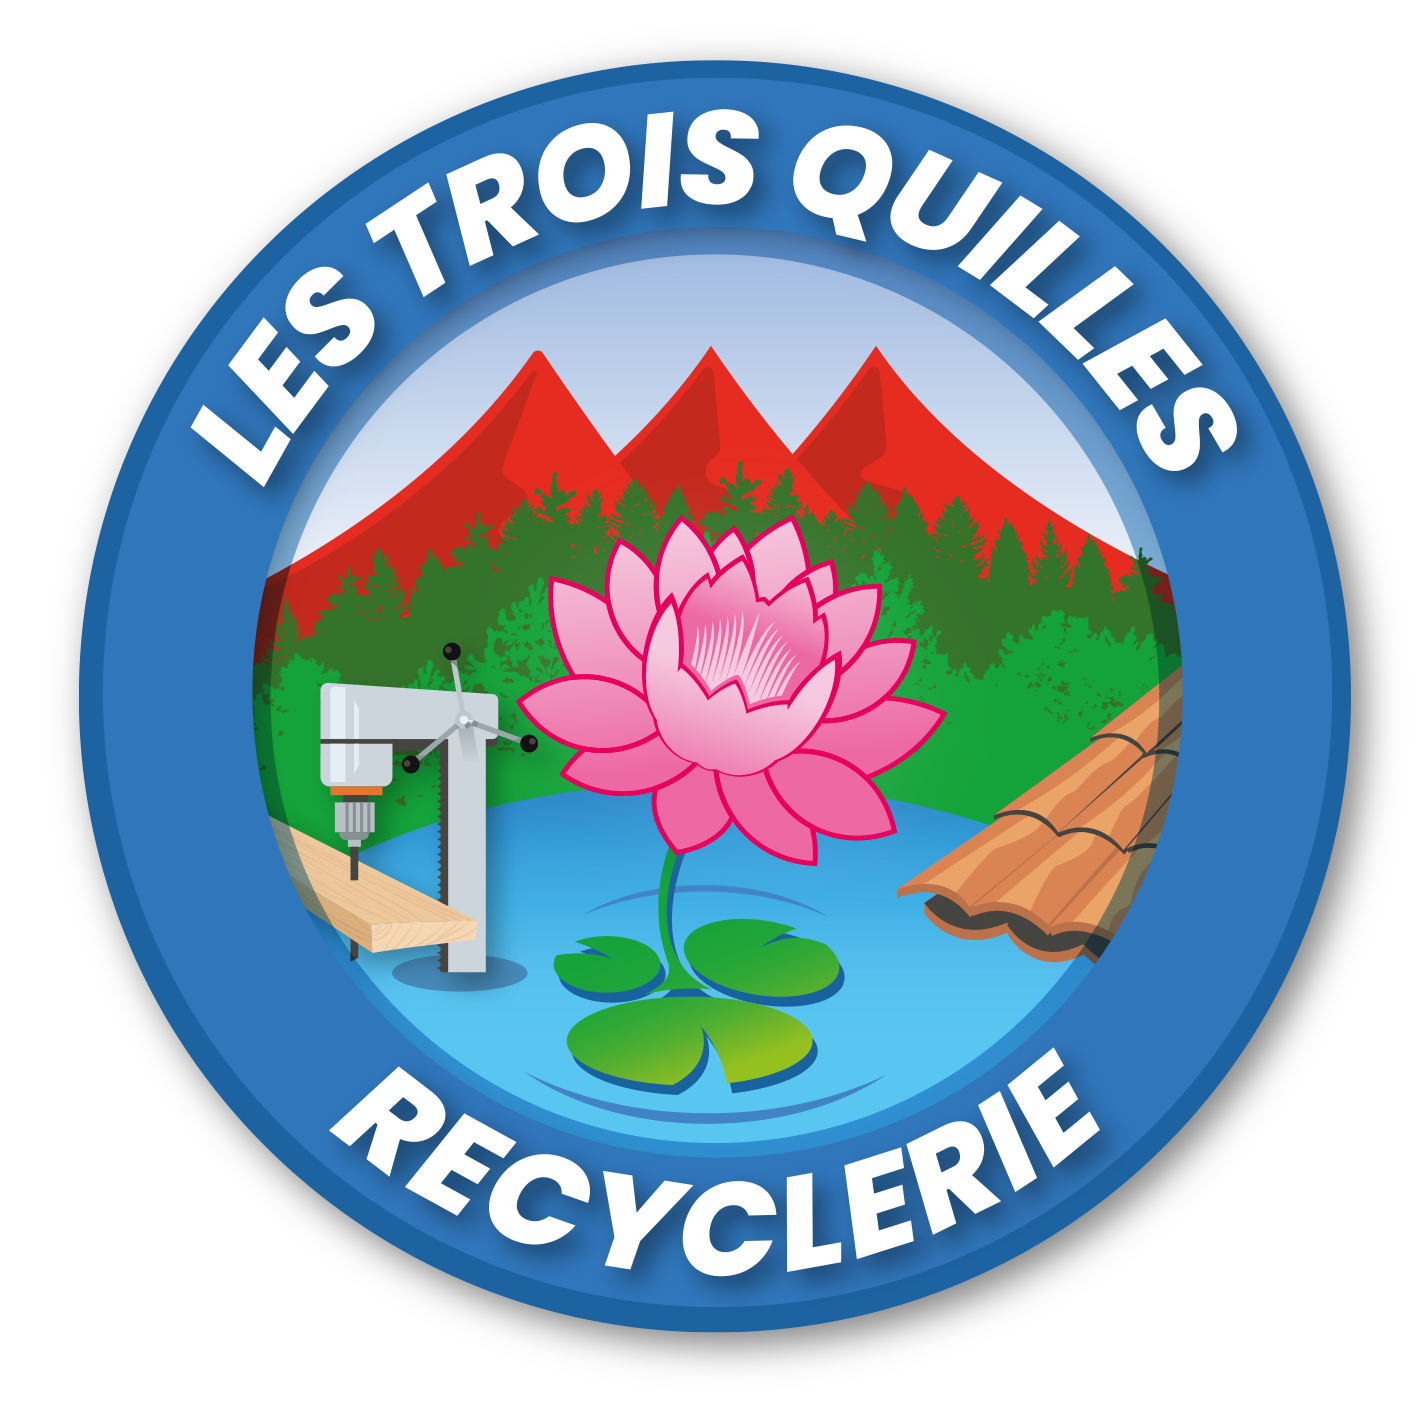 Recyclerie les 3 Quilles